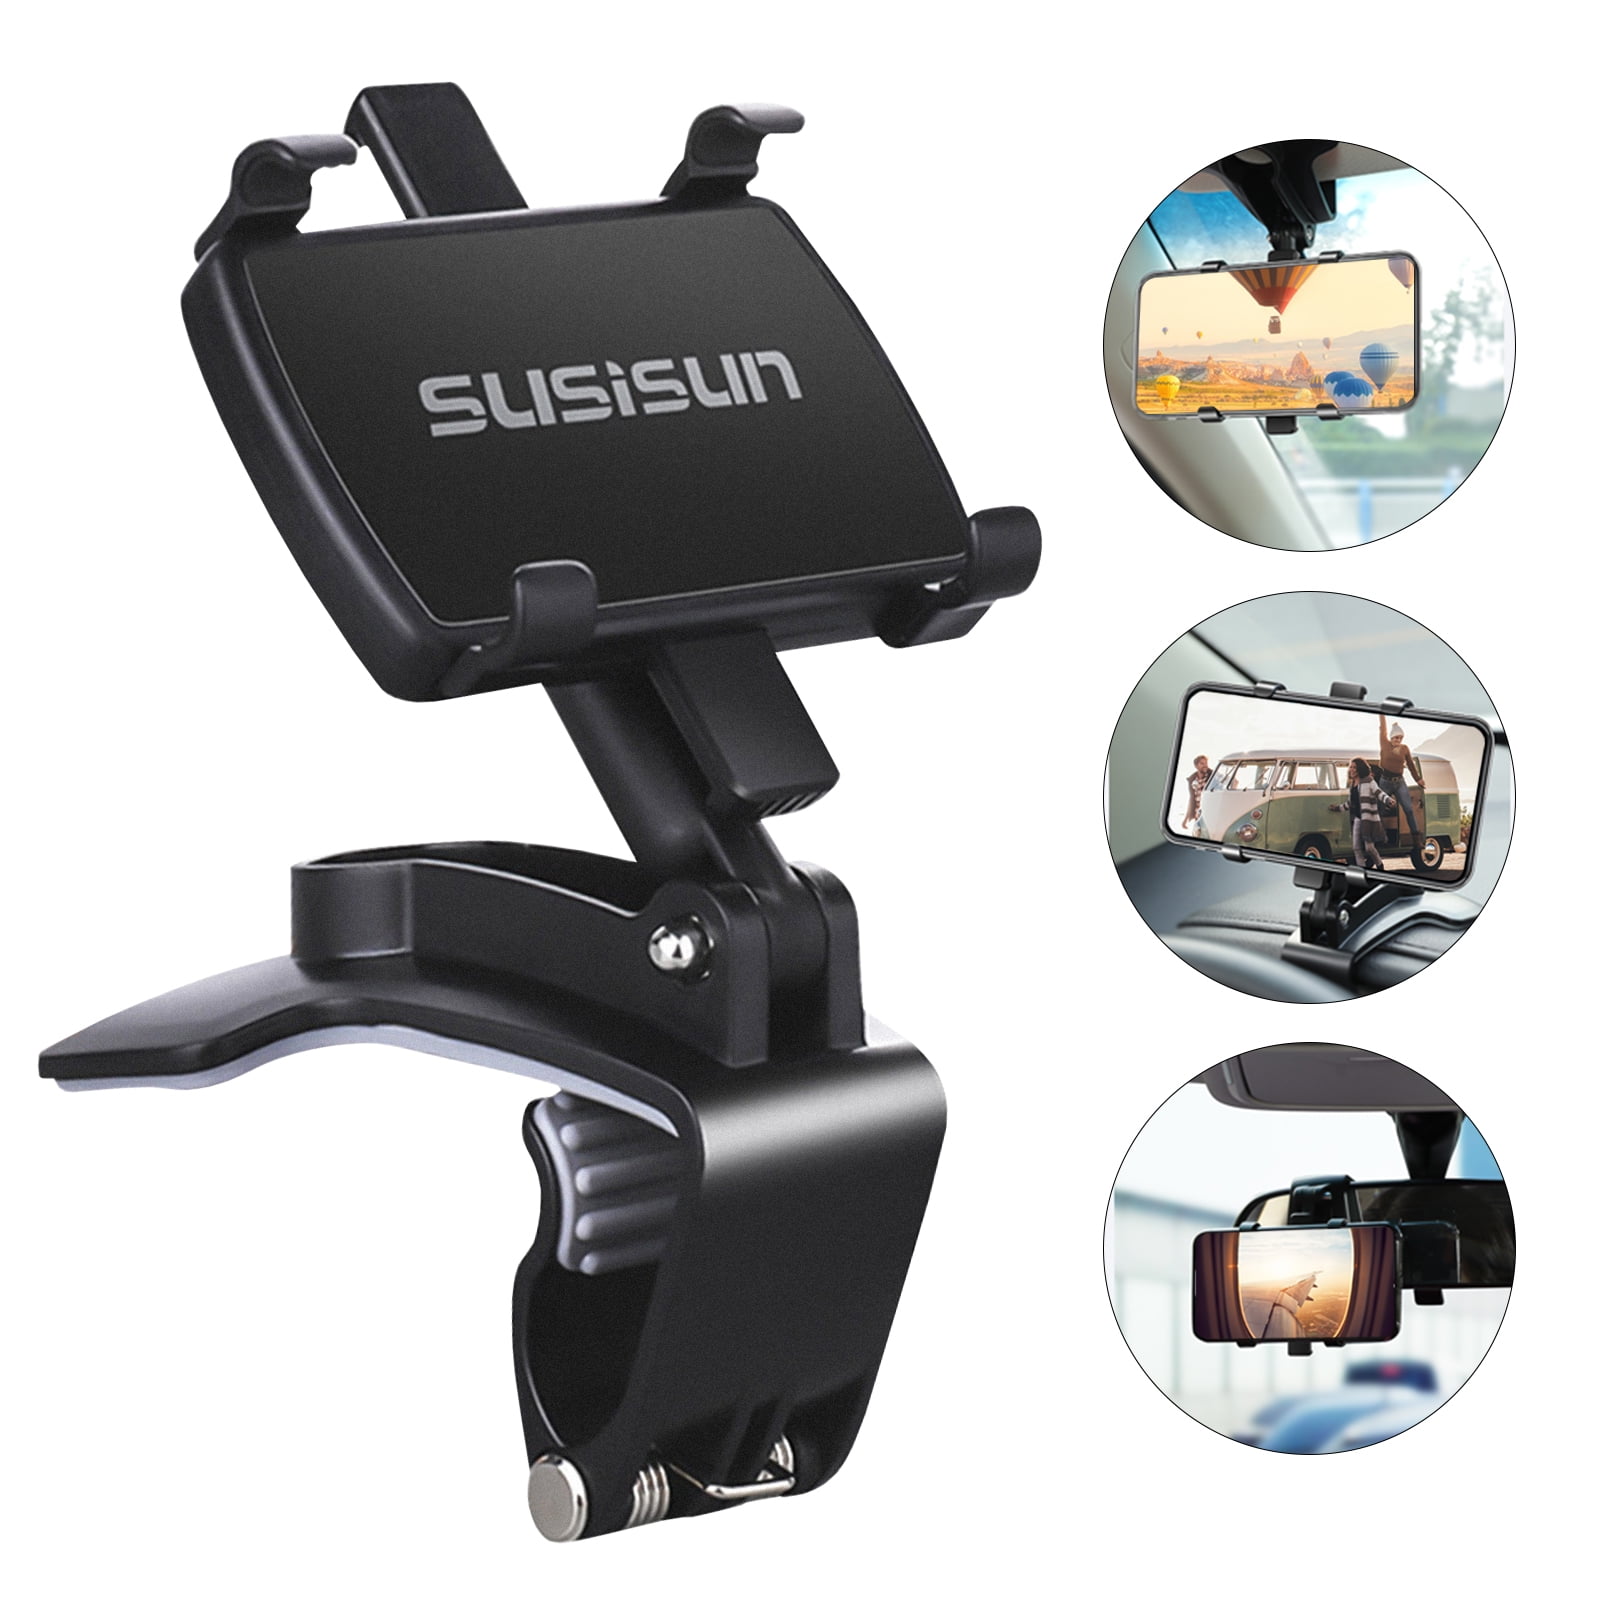 by Cellet Non-Slip Clamp Dashboard Mount for HTC U12+/U11 LIFE/DESIRE 555/U11/U ULTRA/BOLT/Plus and More One Hand Insert Dashboard Phone Holder